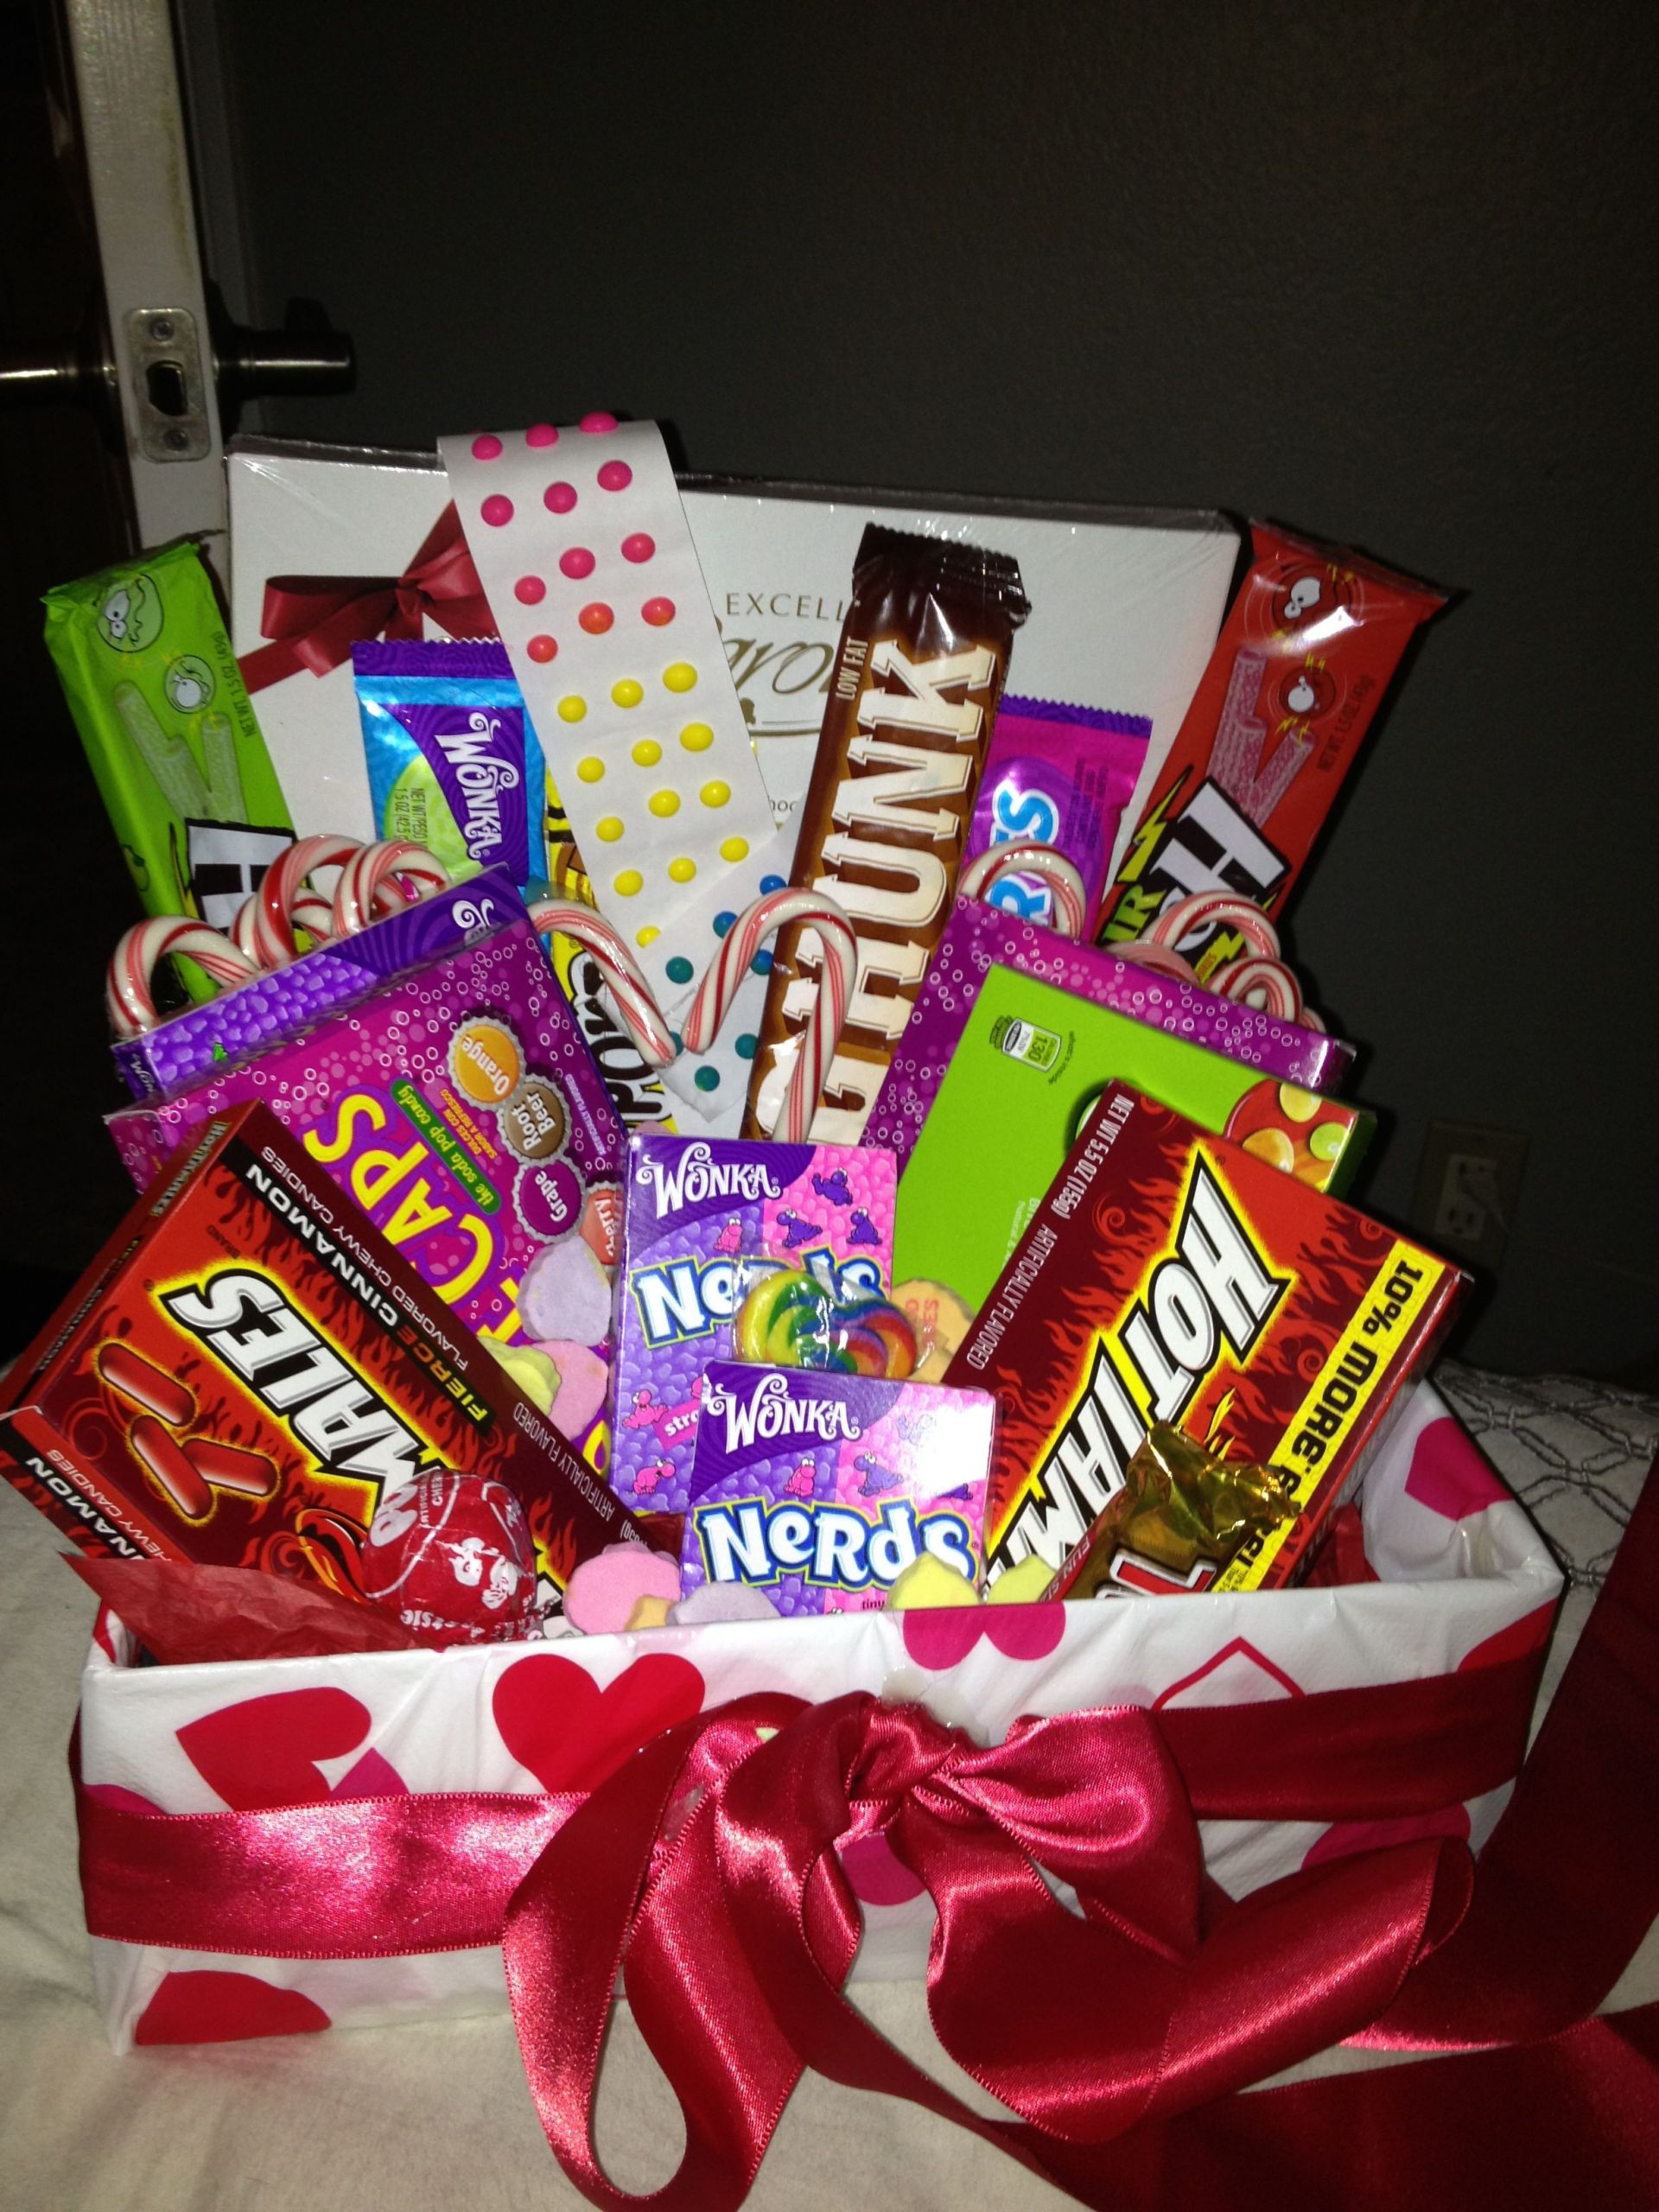 Candy Gift Baskets for Valentines Day Inspirational the Candy Basket I Made for My Boyfriend for Valentines